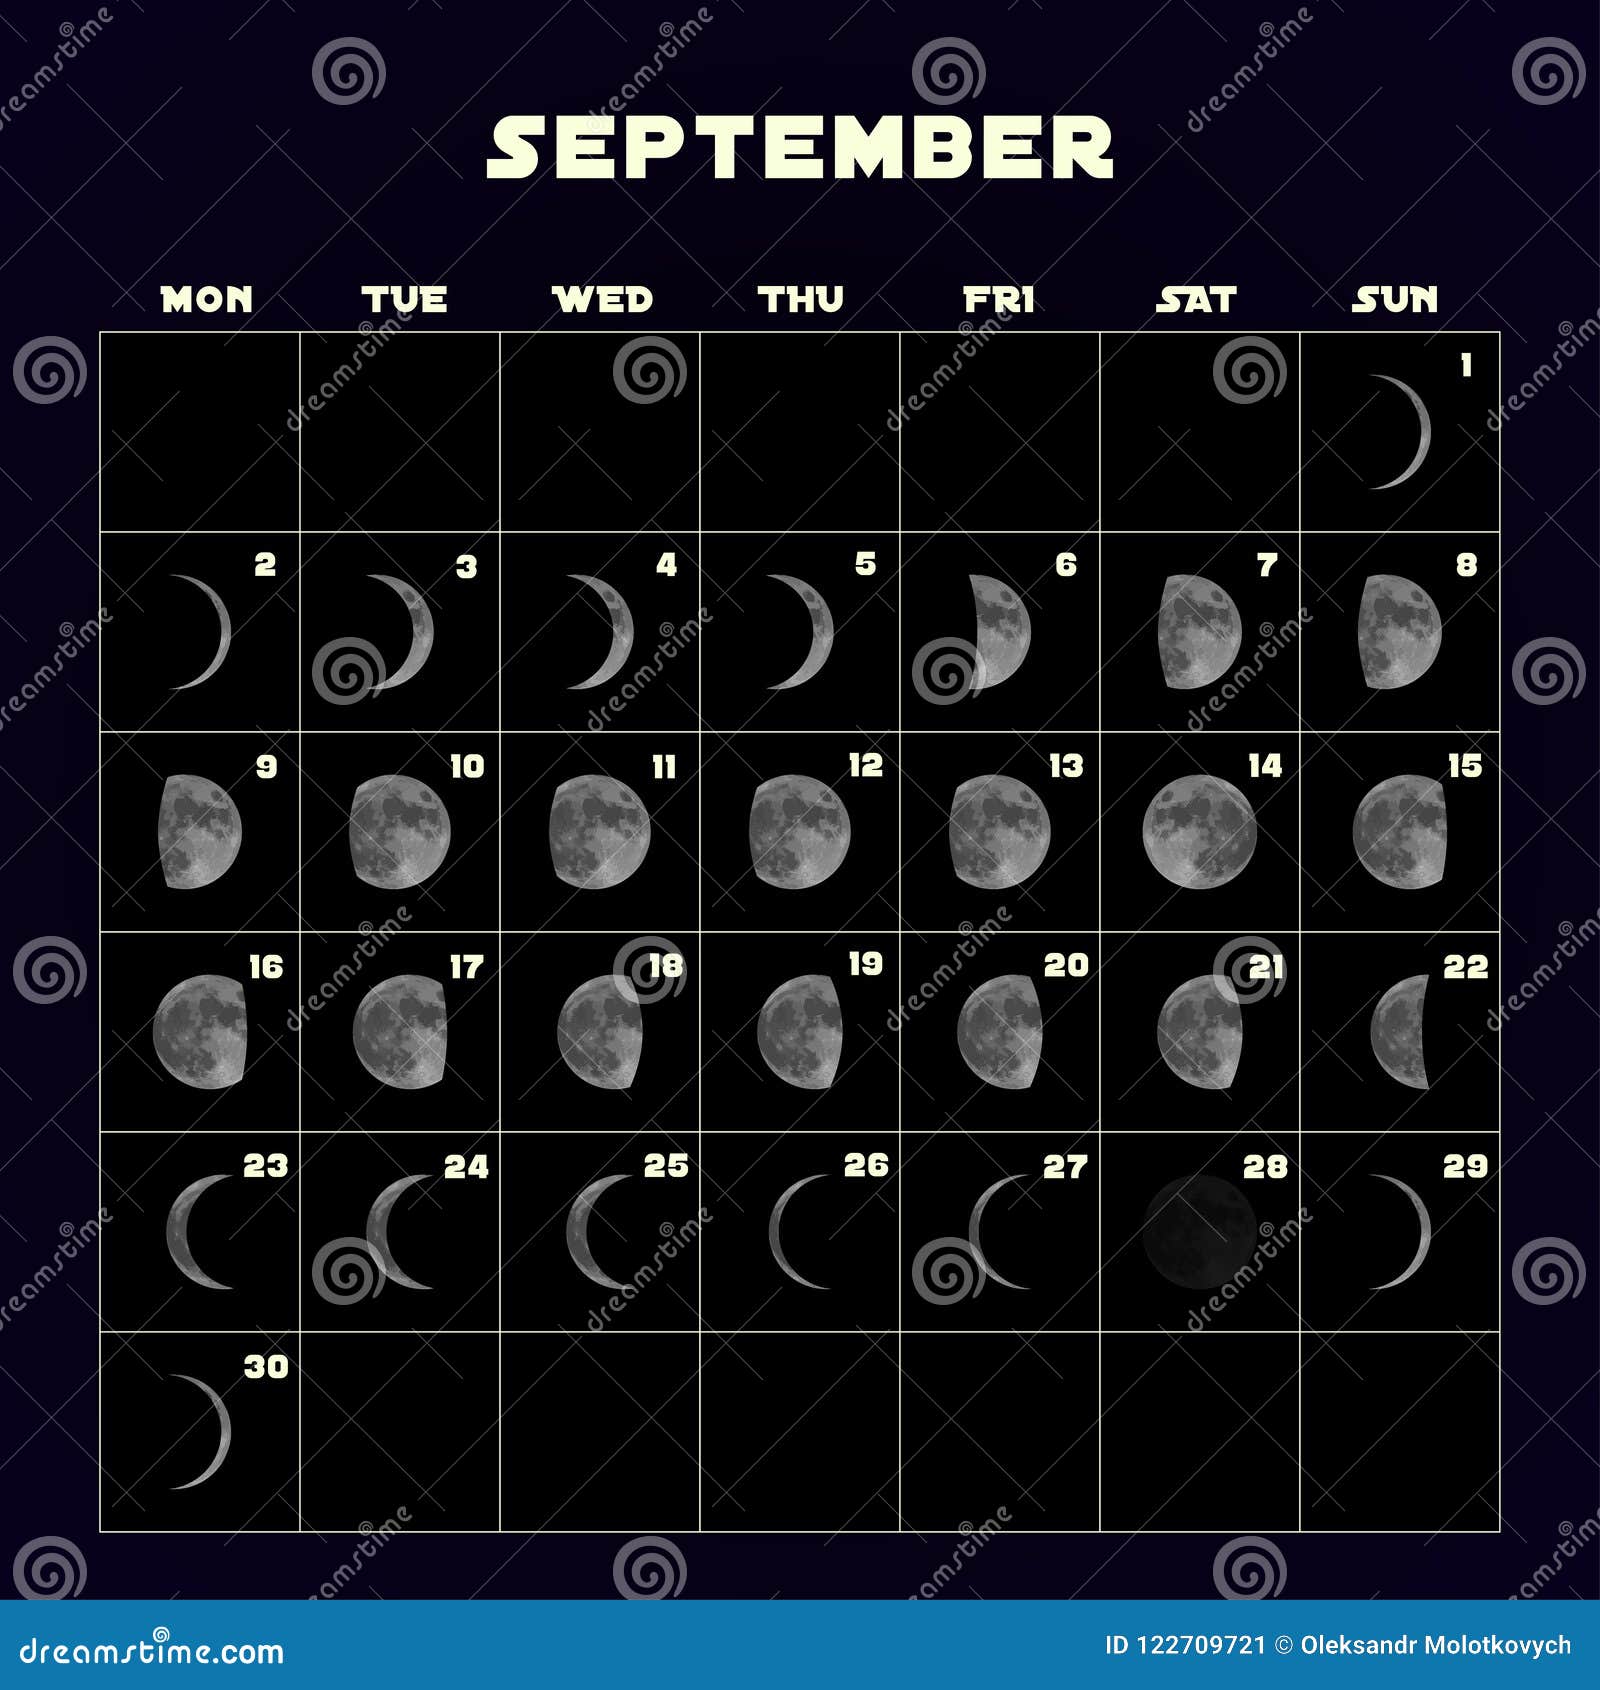 Moon Phases Calendar For 2019 With Realistic Moon September Vector Stock Vector Illustration Of Agenda Graphic 122709721